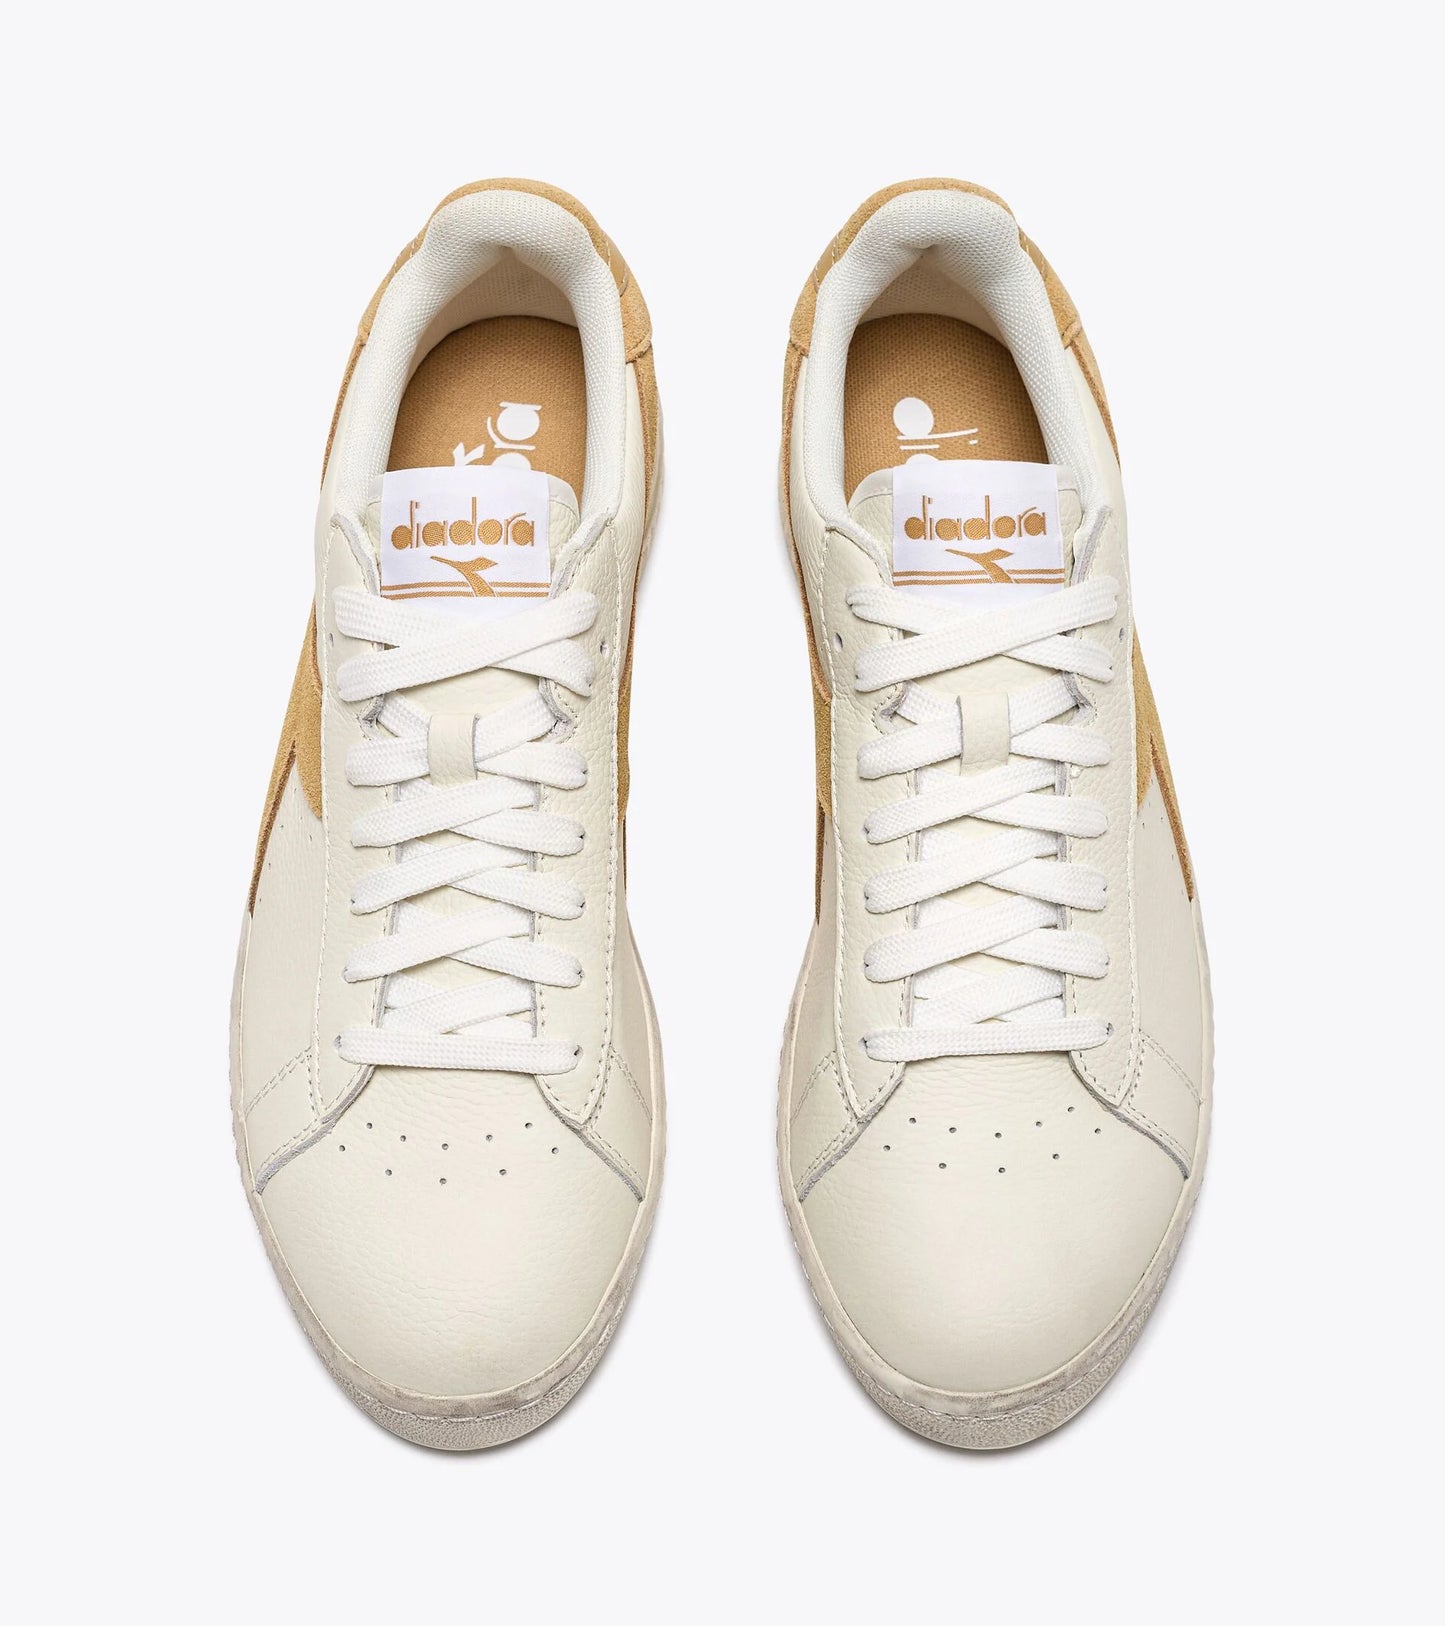 Diadora Game L Low Waxed Suede In White/ Latte